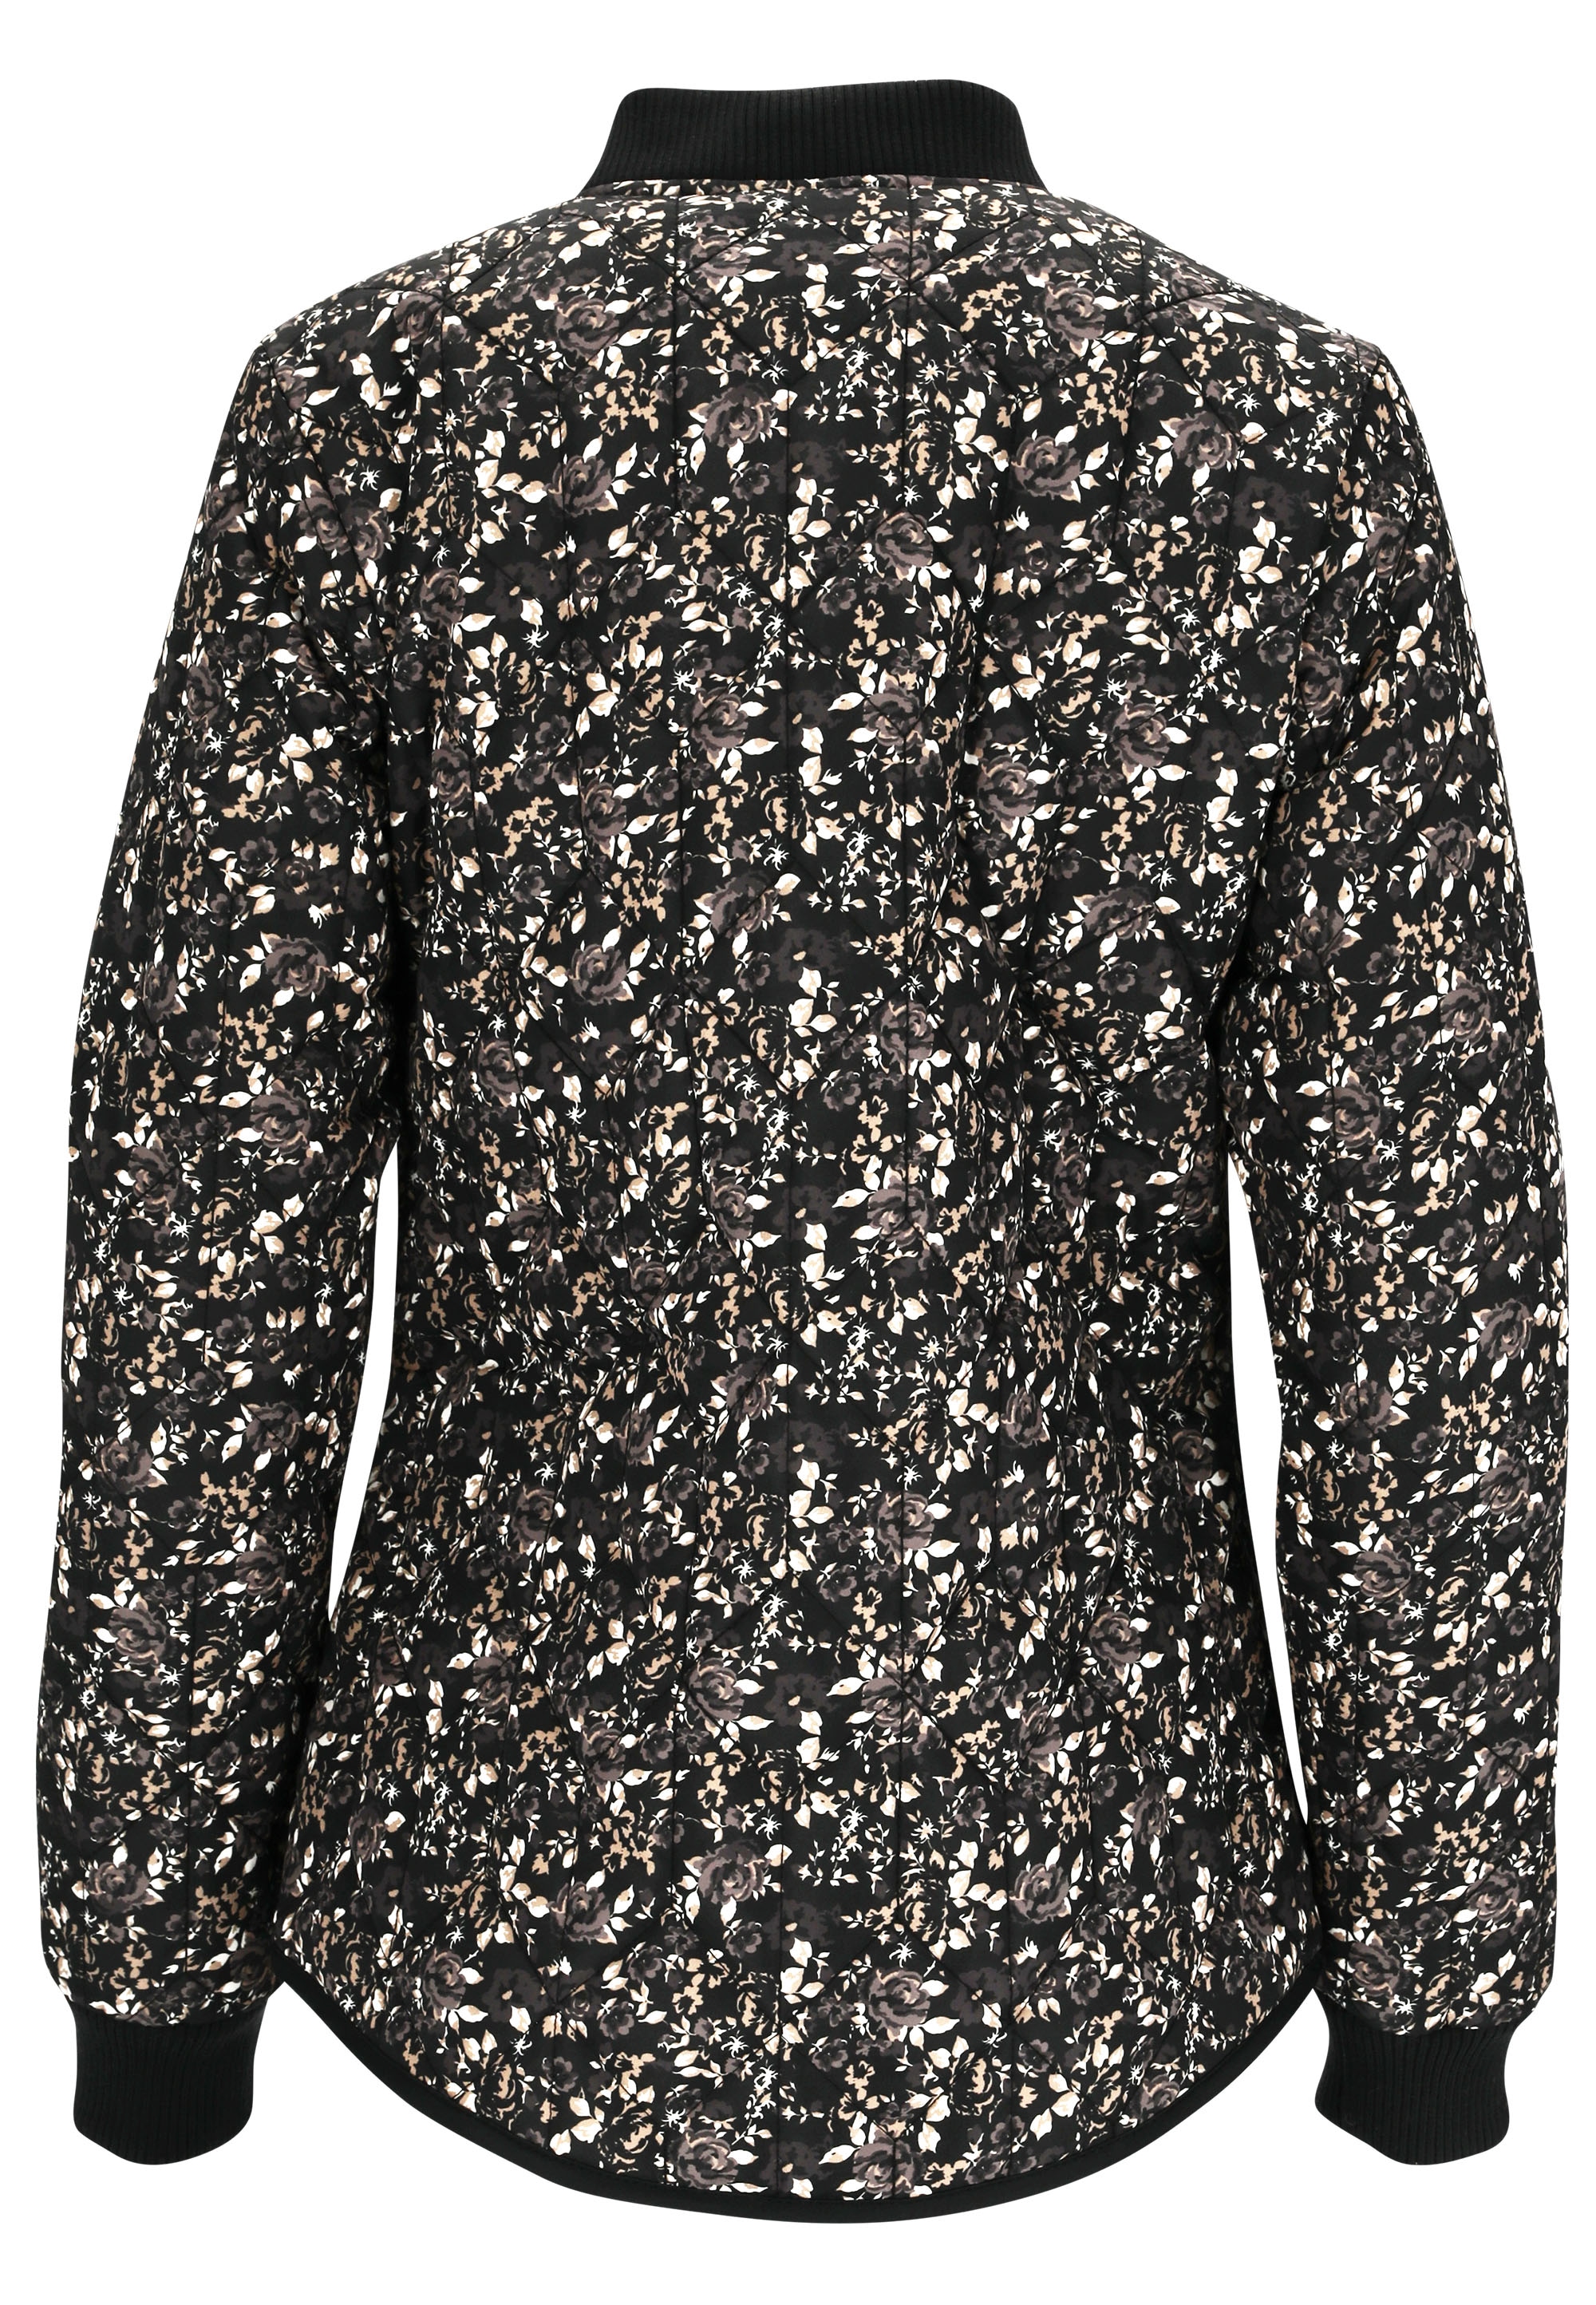 mit Allover-Muster floralem WEATHER REPORT online »Floral«, Outdoorjacke